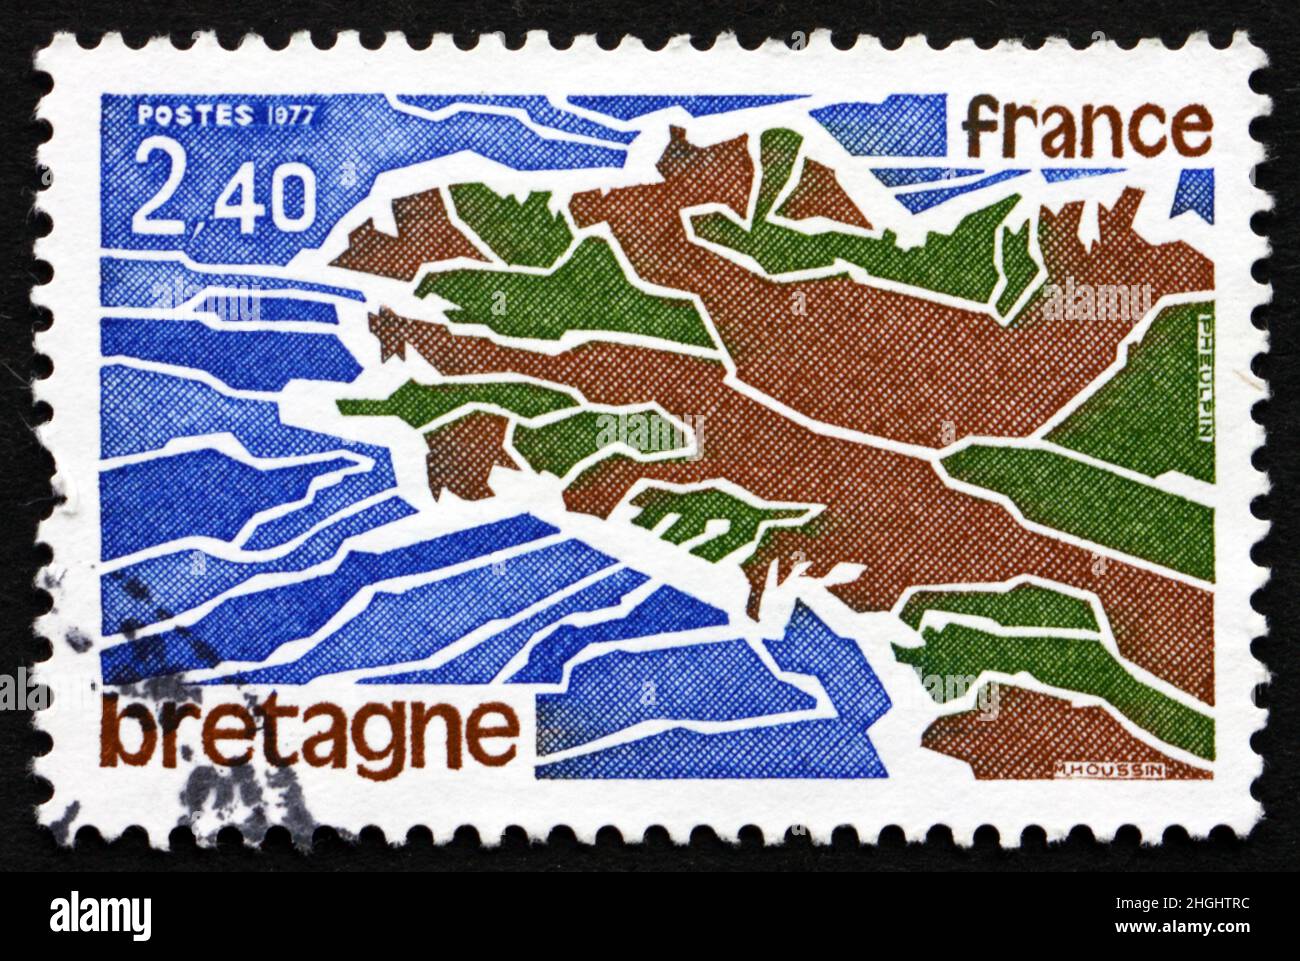 FRANCE - CIRCA 1977: a stamp printed in the France shows Map of Brittany, a Cultural Region in the North-west France, circa 1977 Stock Photo